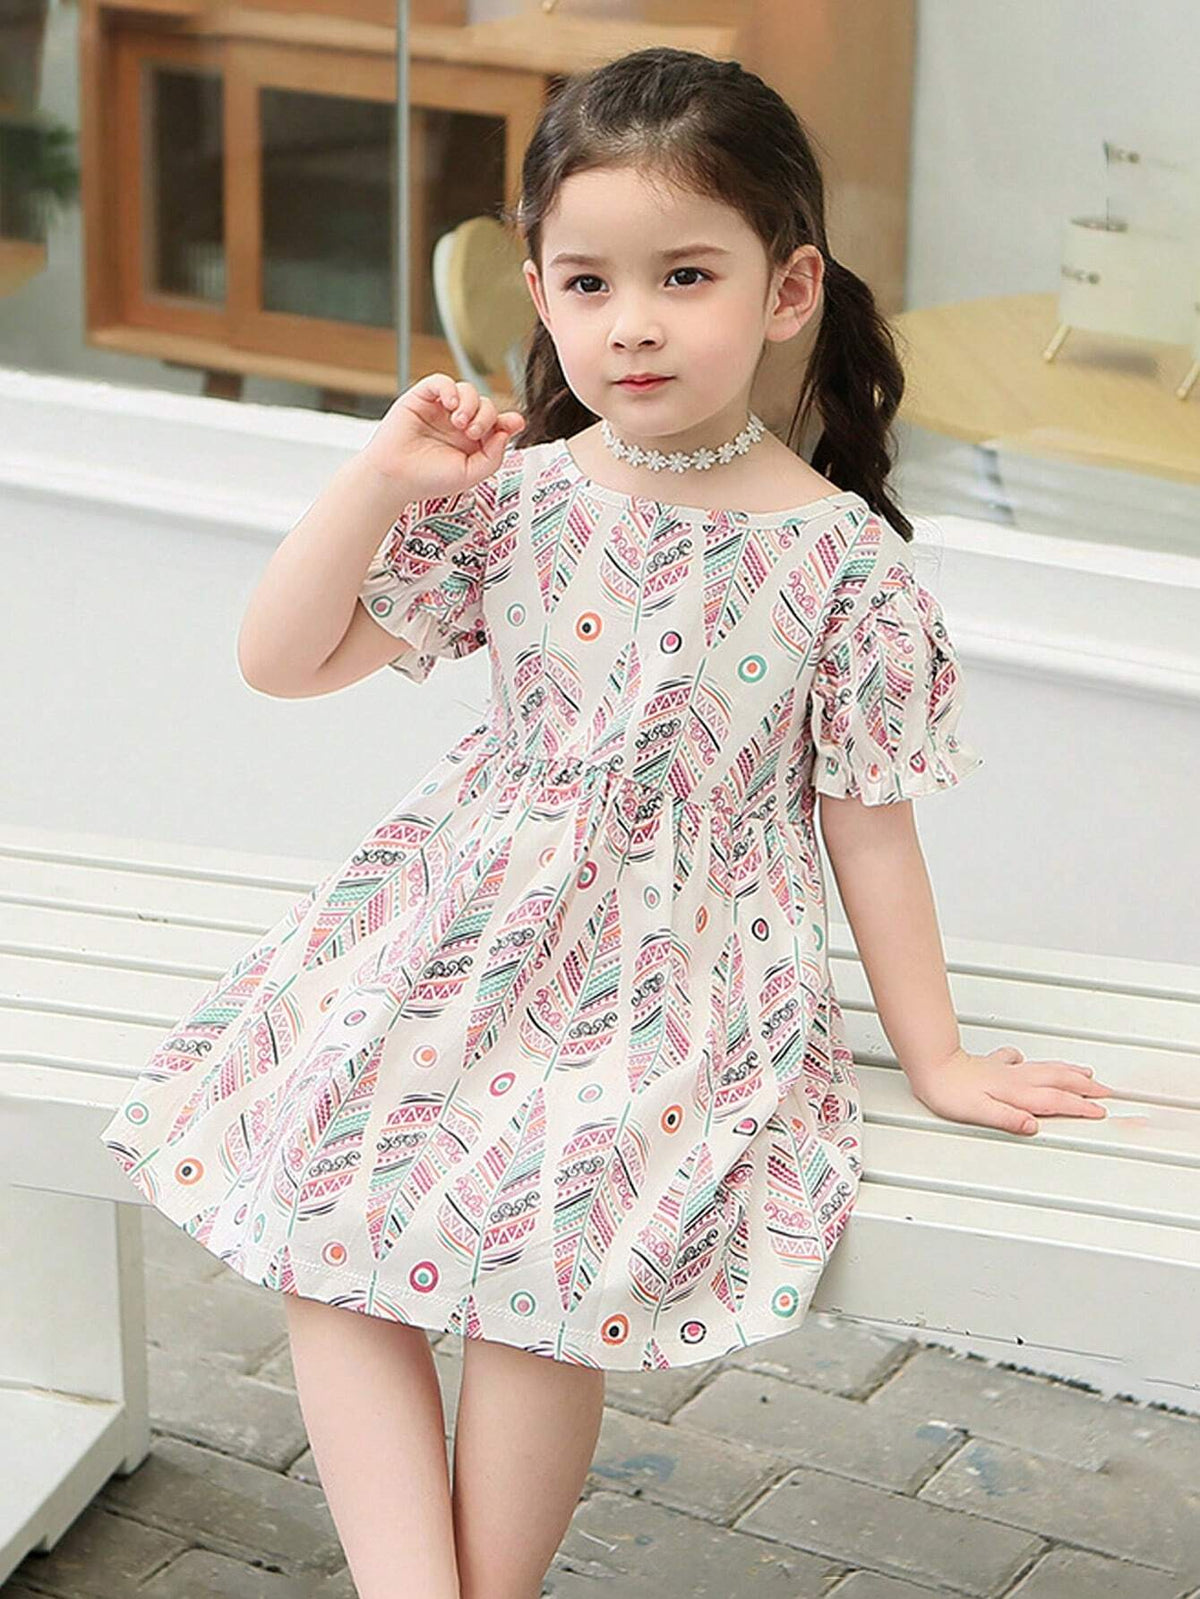 1pc Bohemian/Cute/Cartoon Graffiti Printed Half-Sleeve Cotton Breathable Soft Thin A-Line Dress For Toddler/Little Girl In Spring/Summer